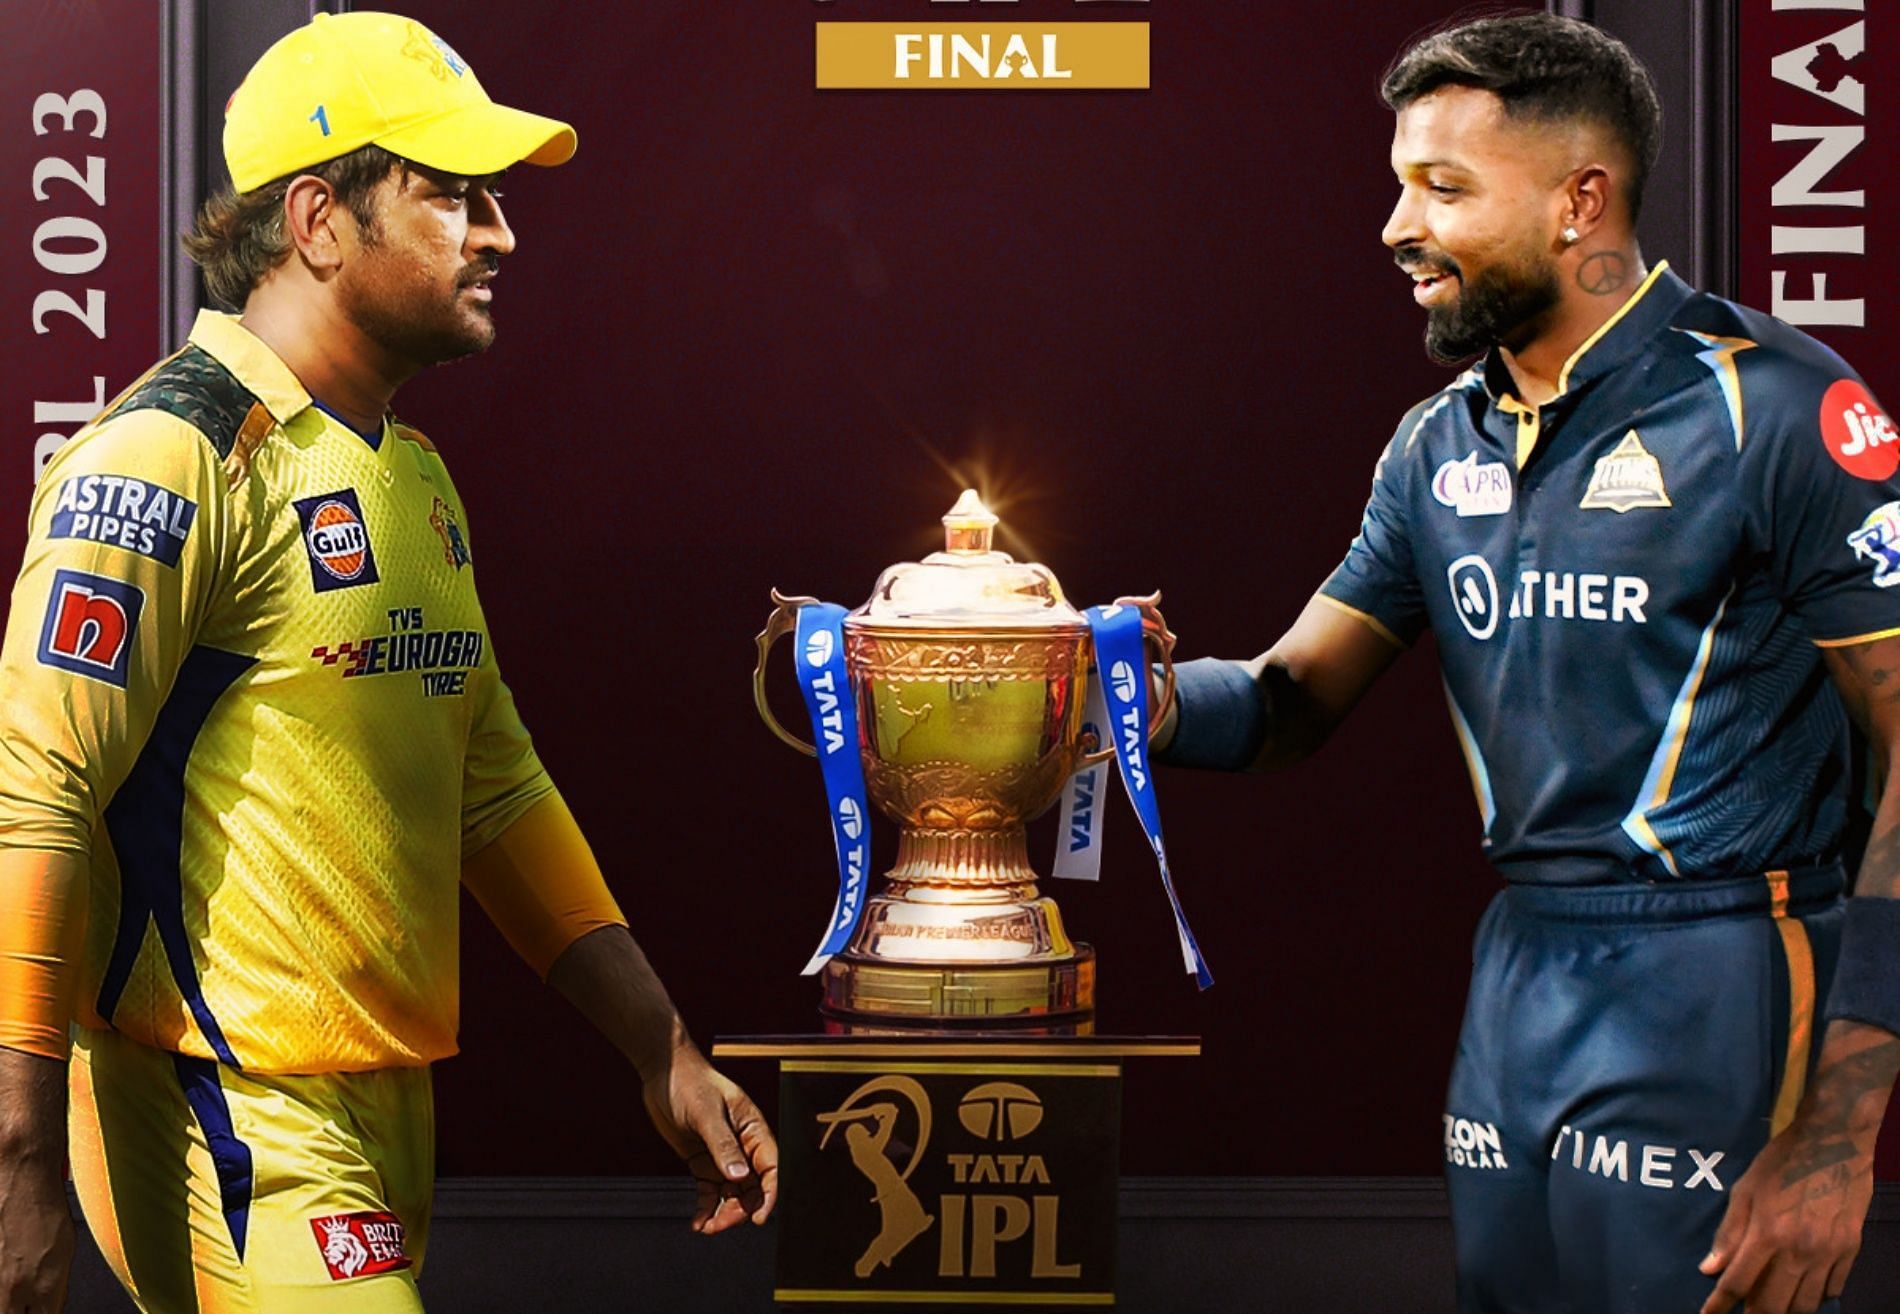 MI Vs RCB LIVE Streaming Special Offers Reliance Jio Airtel Vodafone Idea  Where To Watch IPL 2021 Opening Match Online Offers To Get Hotstar VIP  Access Free